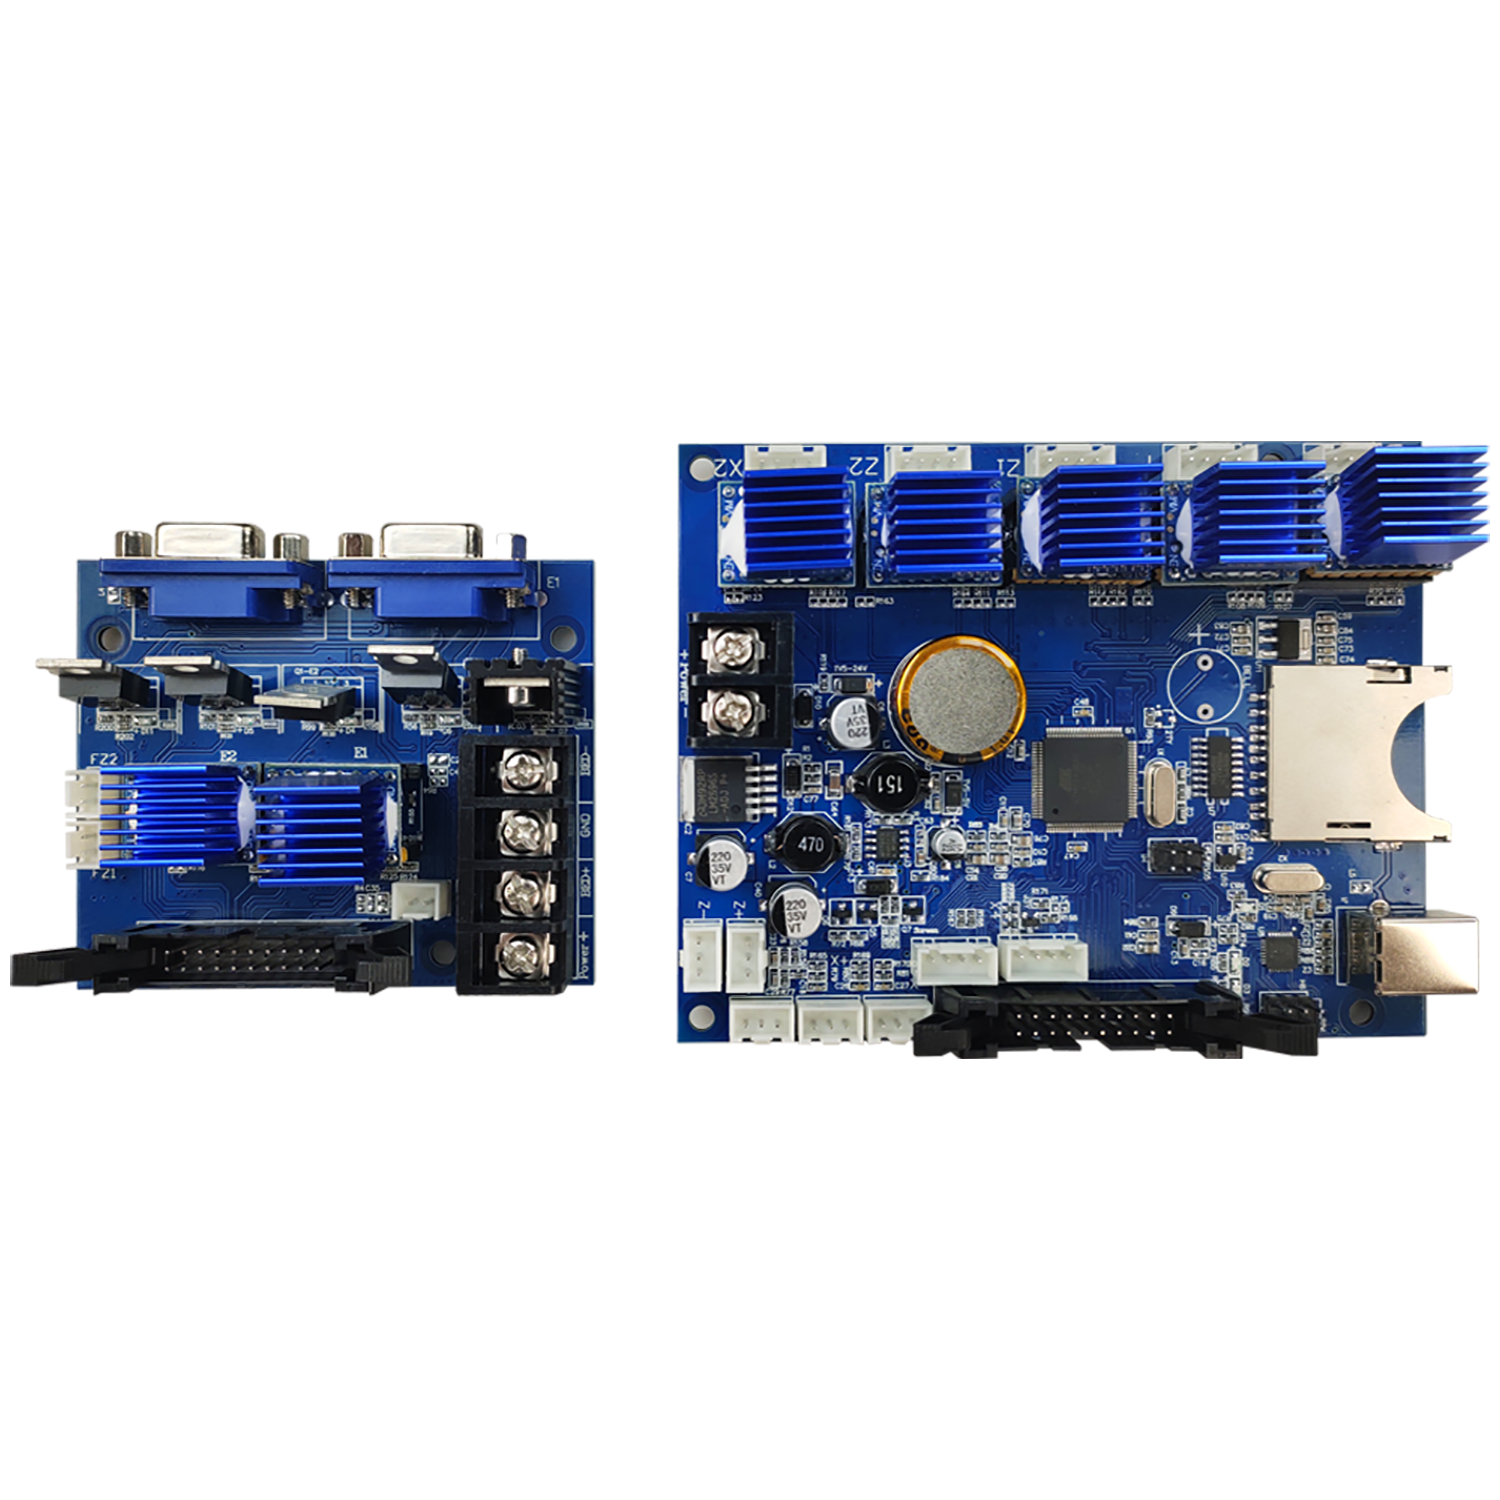 Tenlog DMP 7-axis Motherboard (Version 2) Support A4988 and TMC2208 Driver & Touch Screen